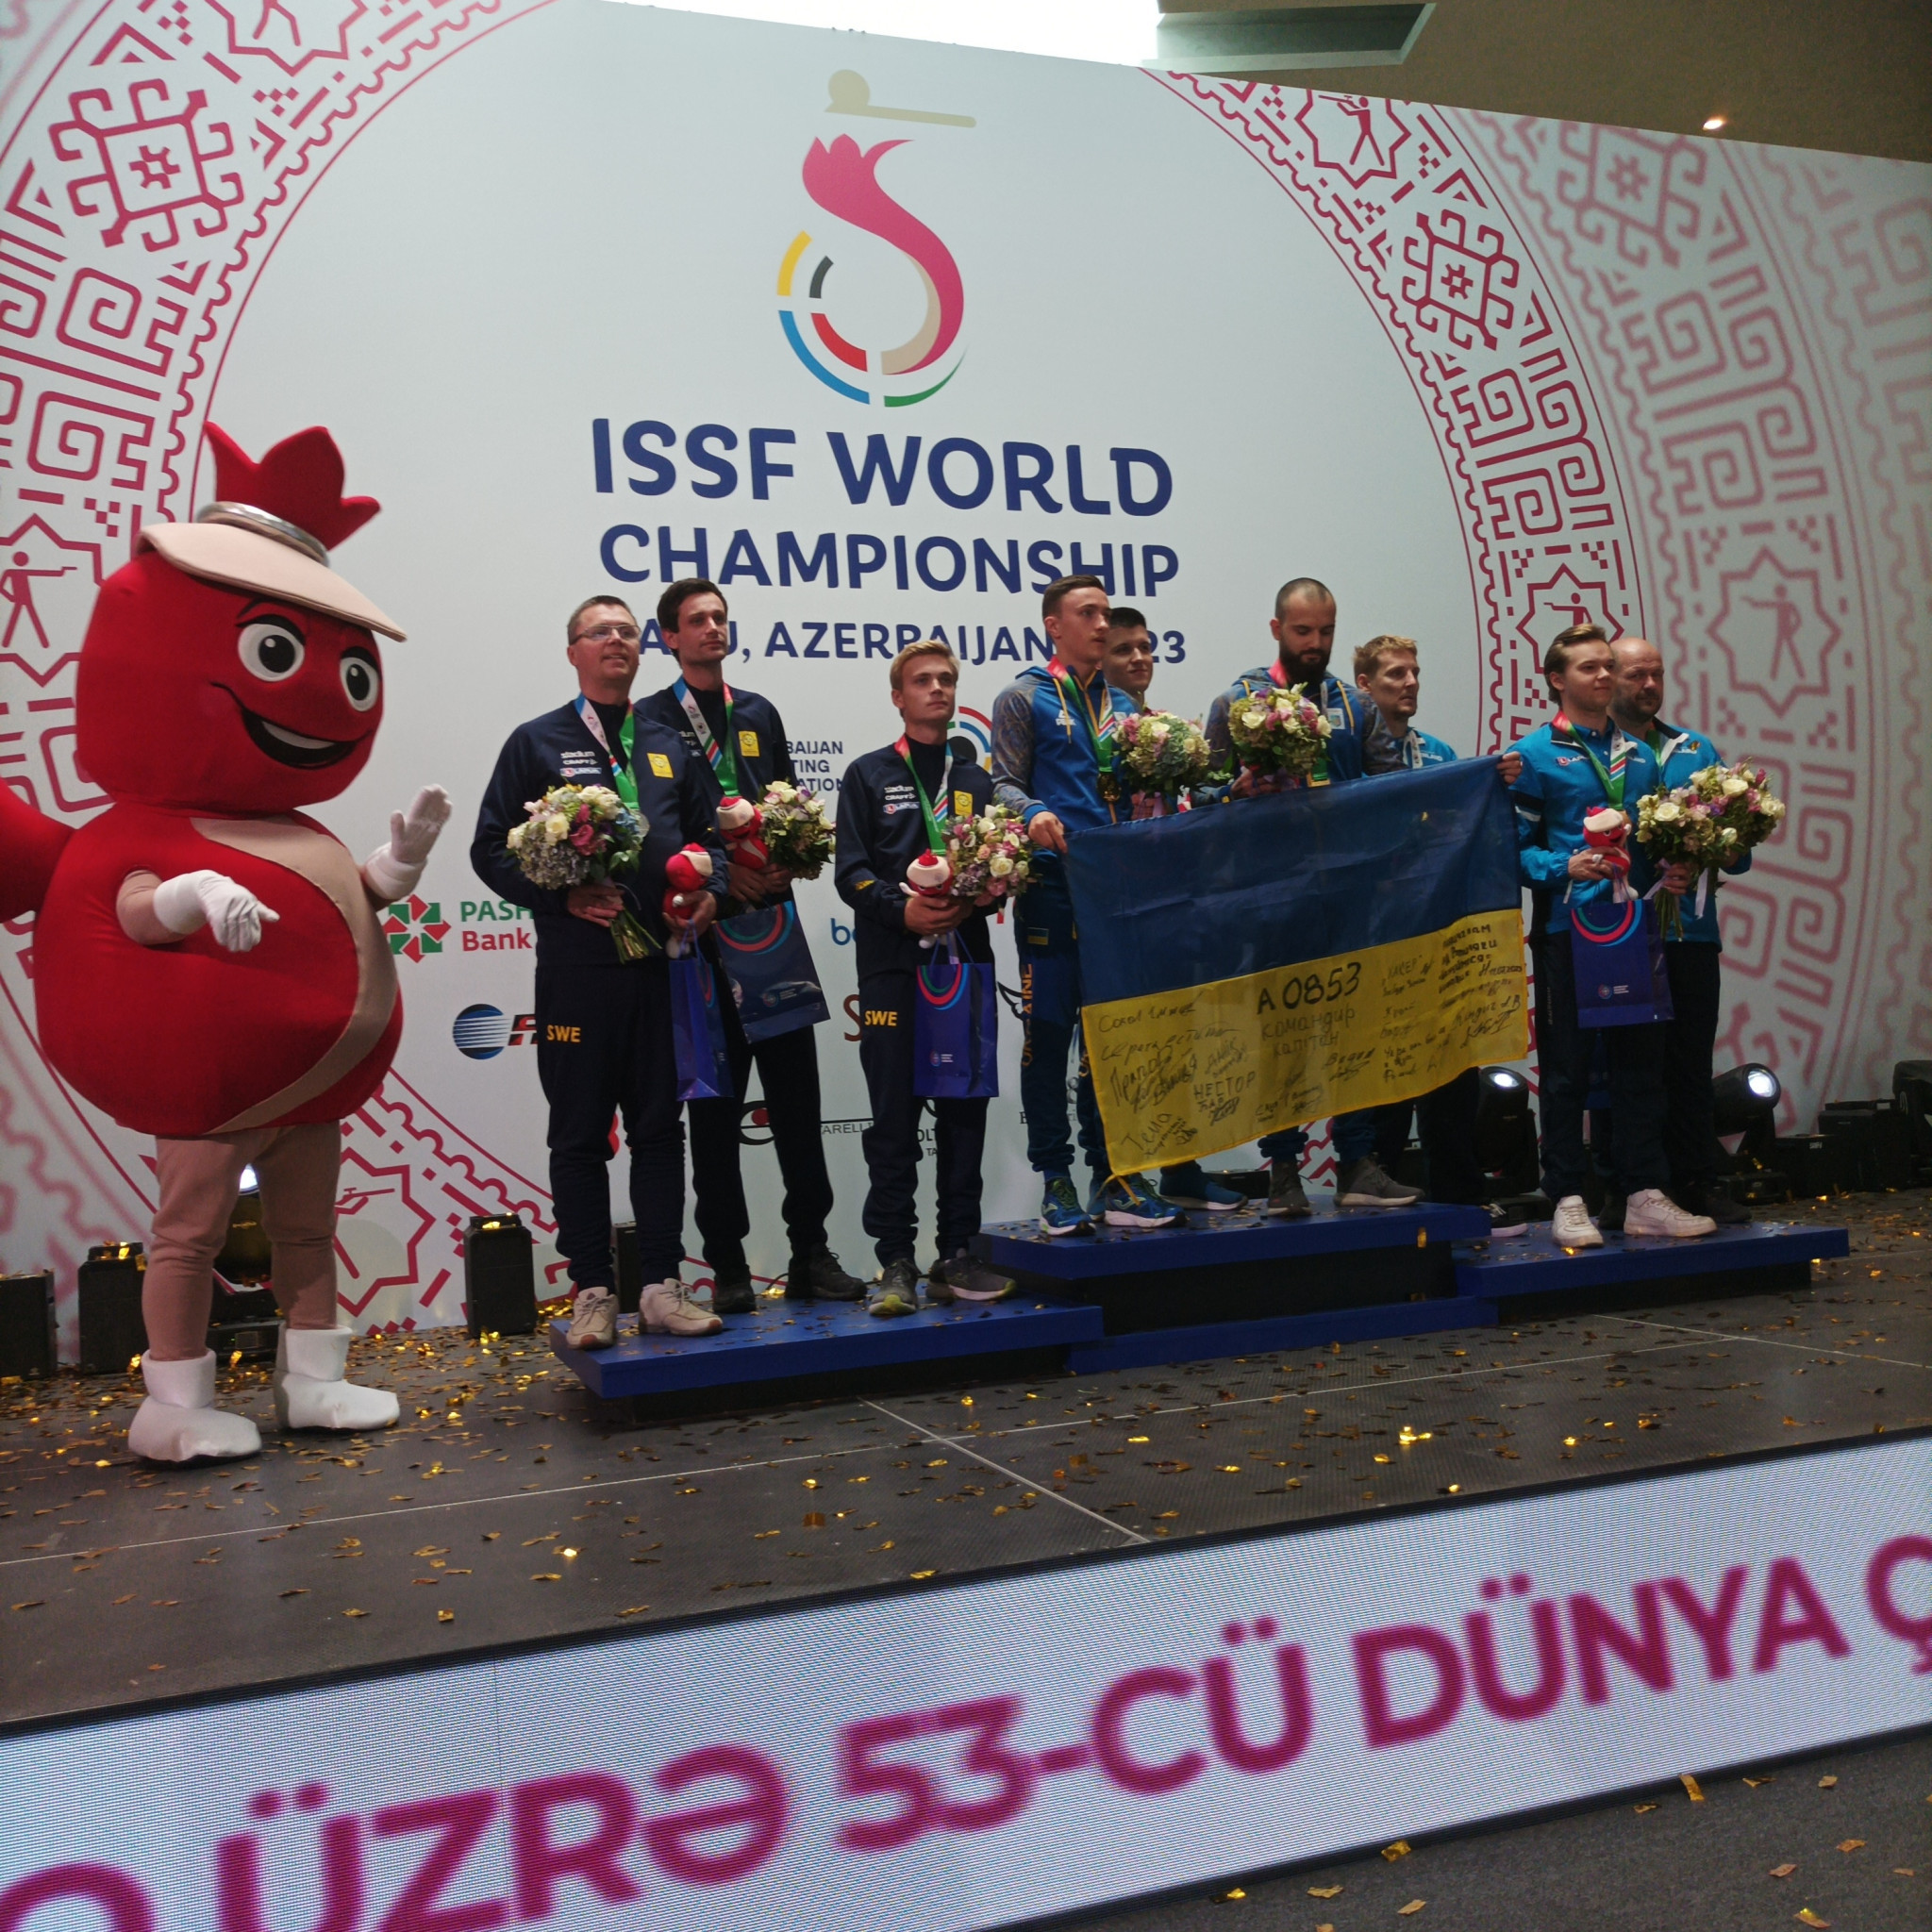 The Ukrainian medallists had carried their national flag on to the podium ©ITG